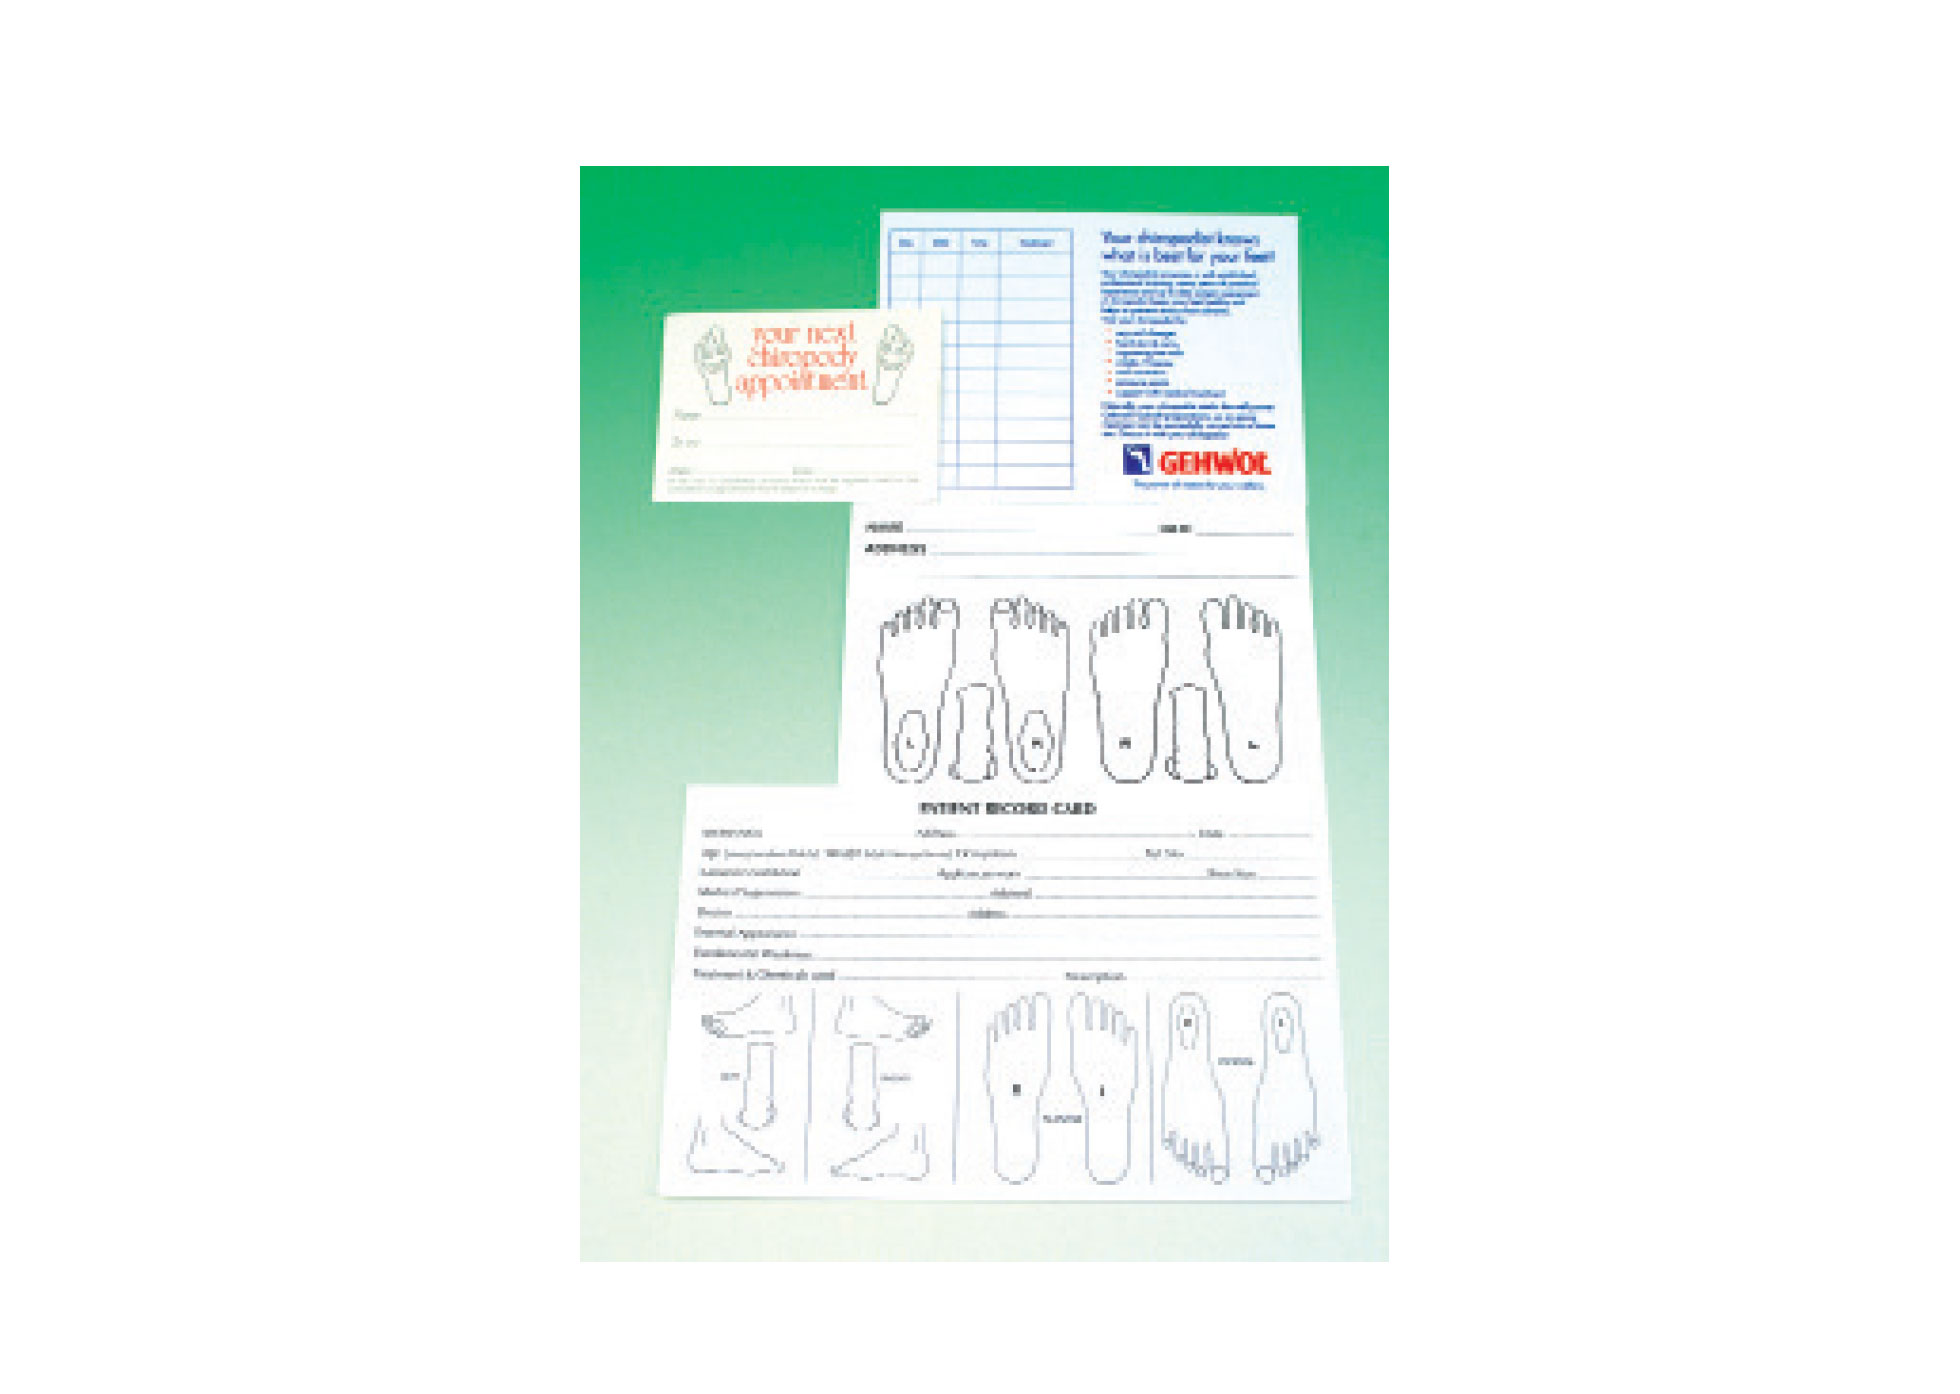 Patient Appointment Cards - Pack of 200